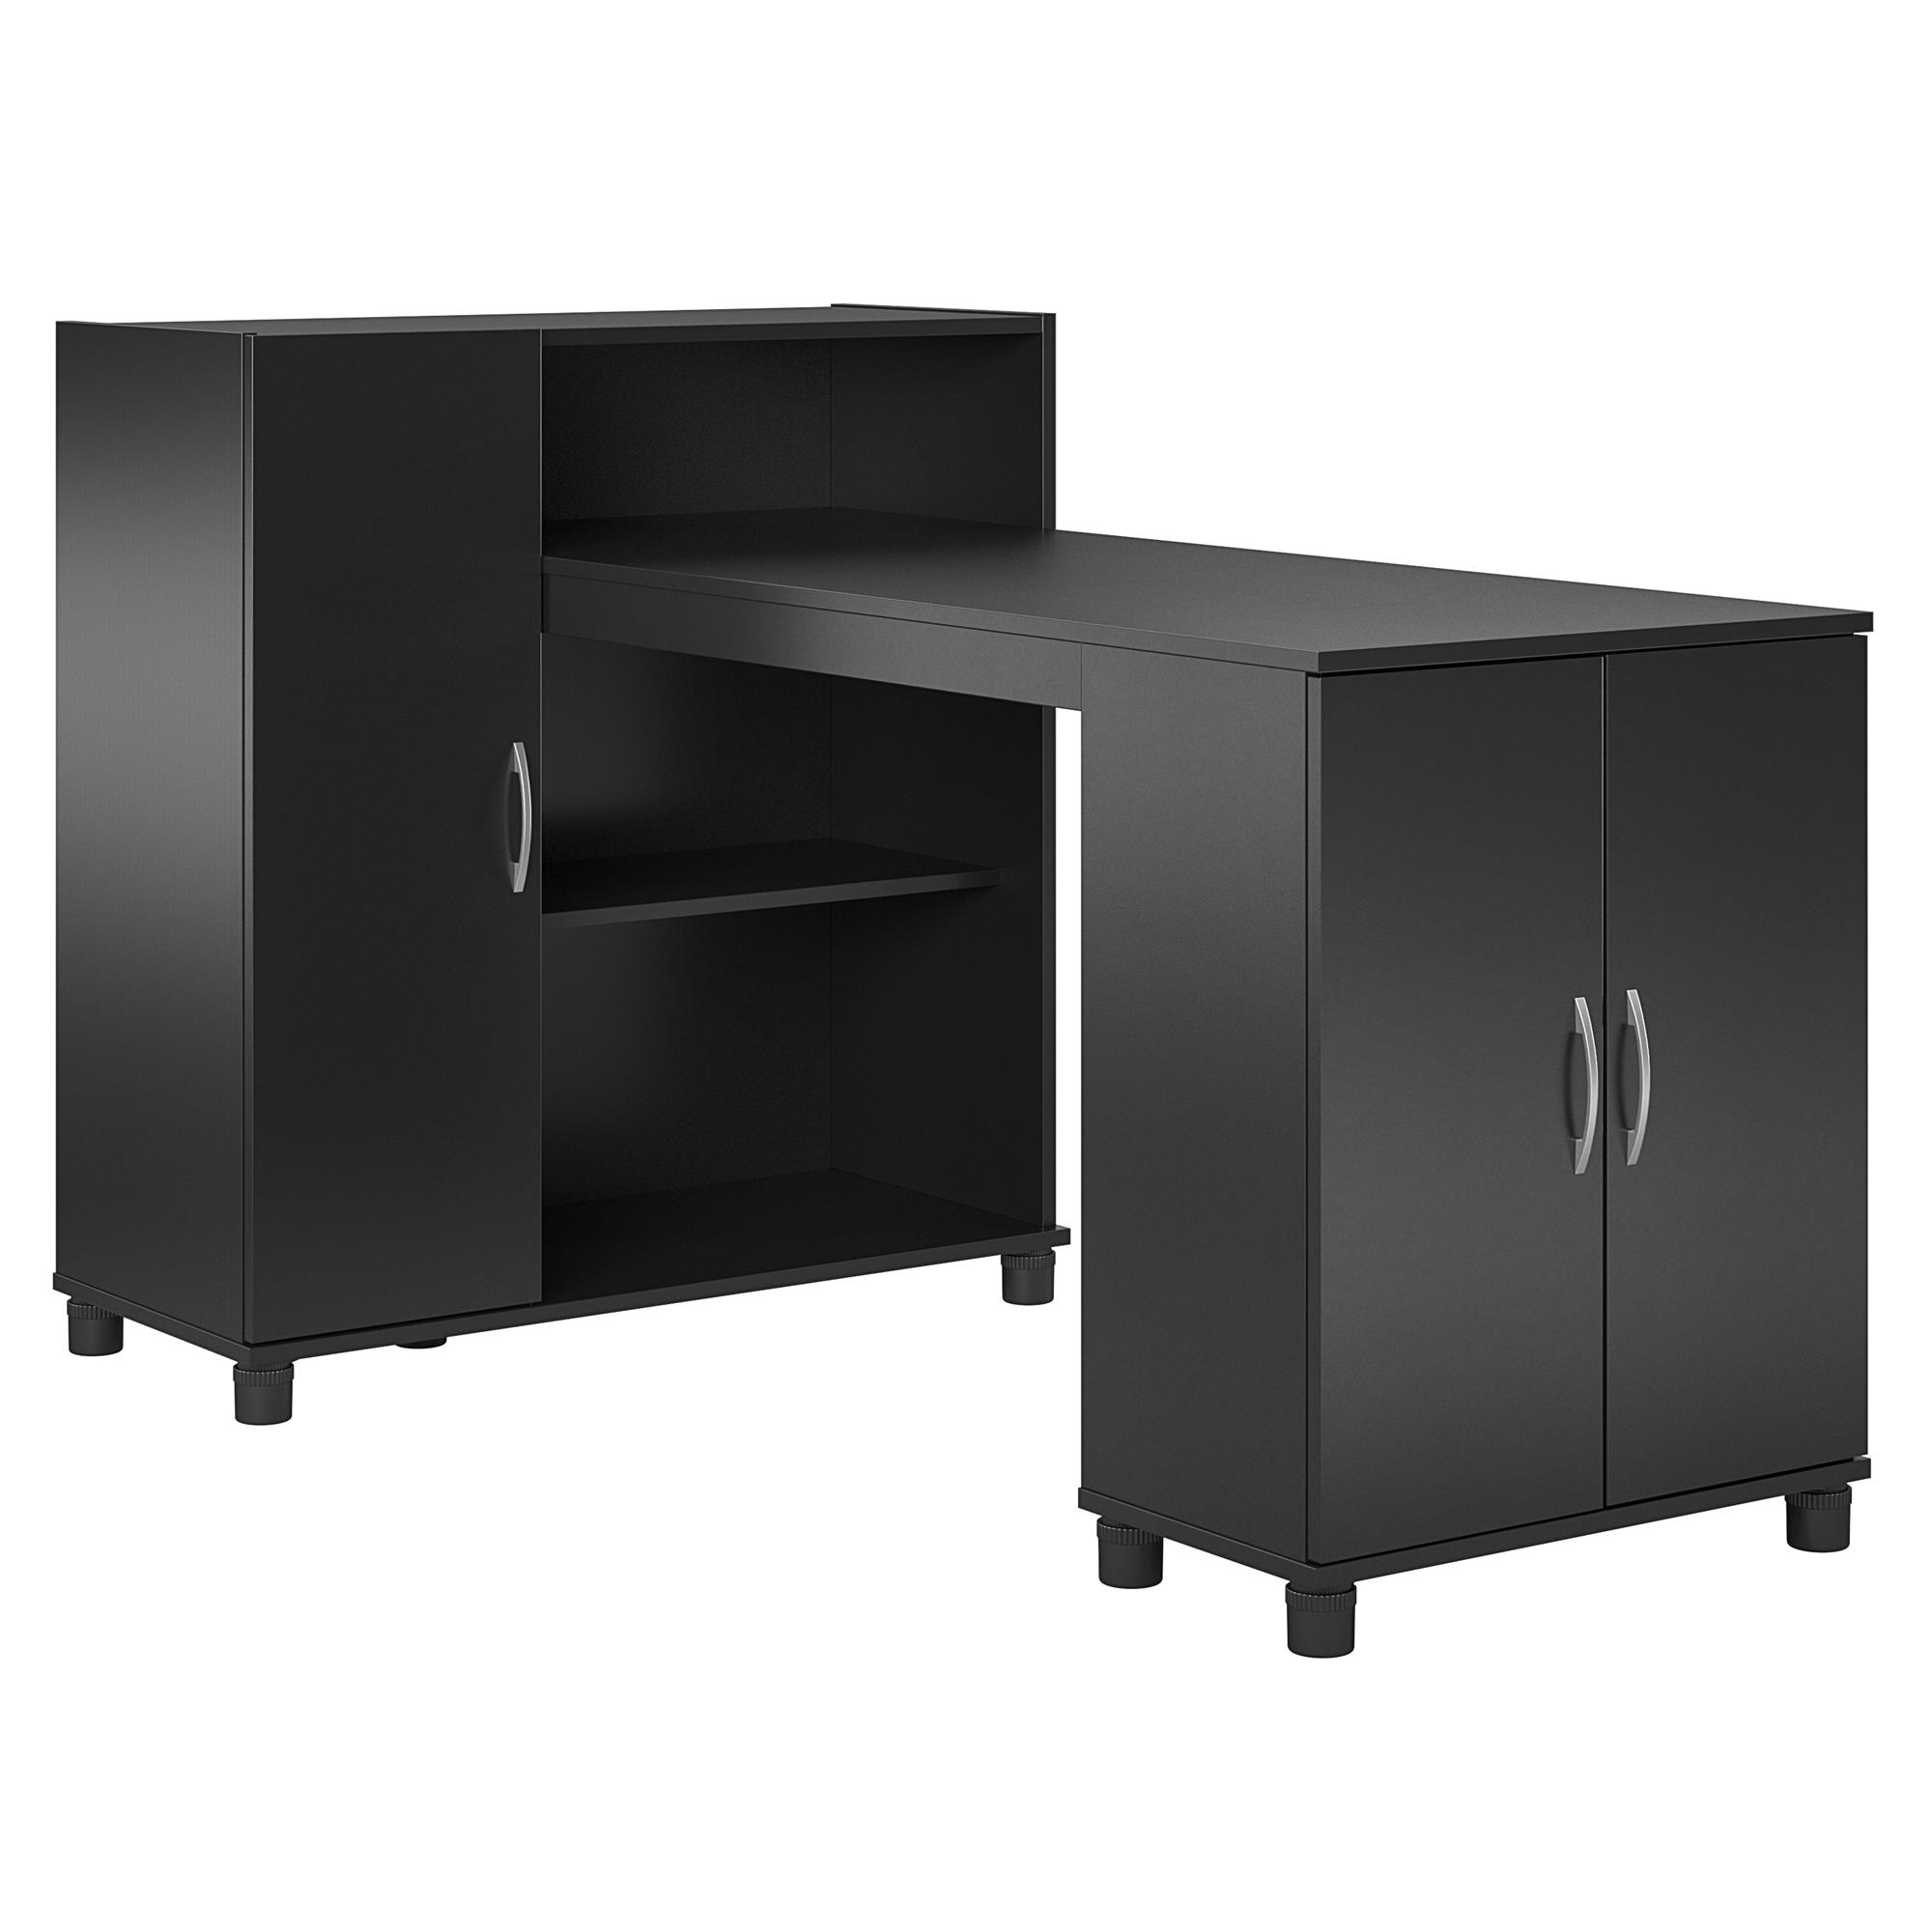 RealRooms Basin Hobby and Craft Desk with Storage, Black - image 1 of 9